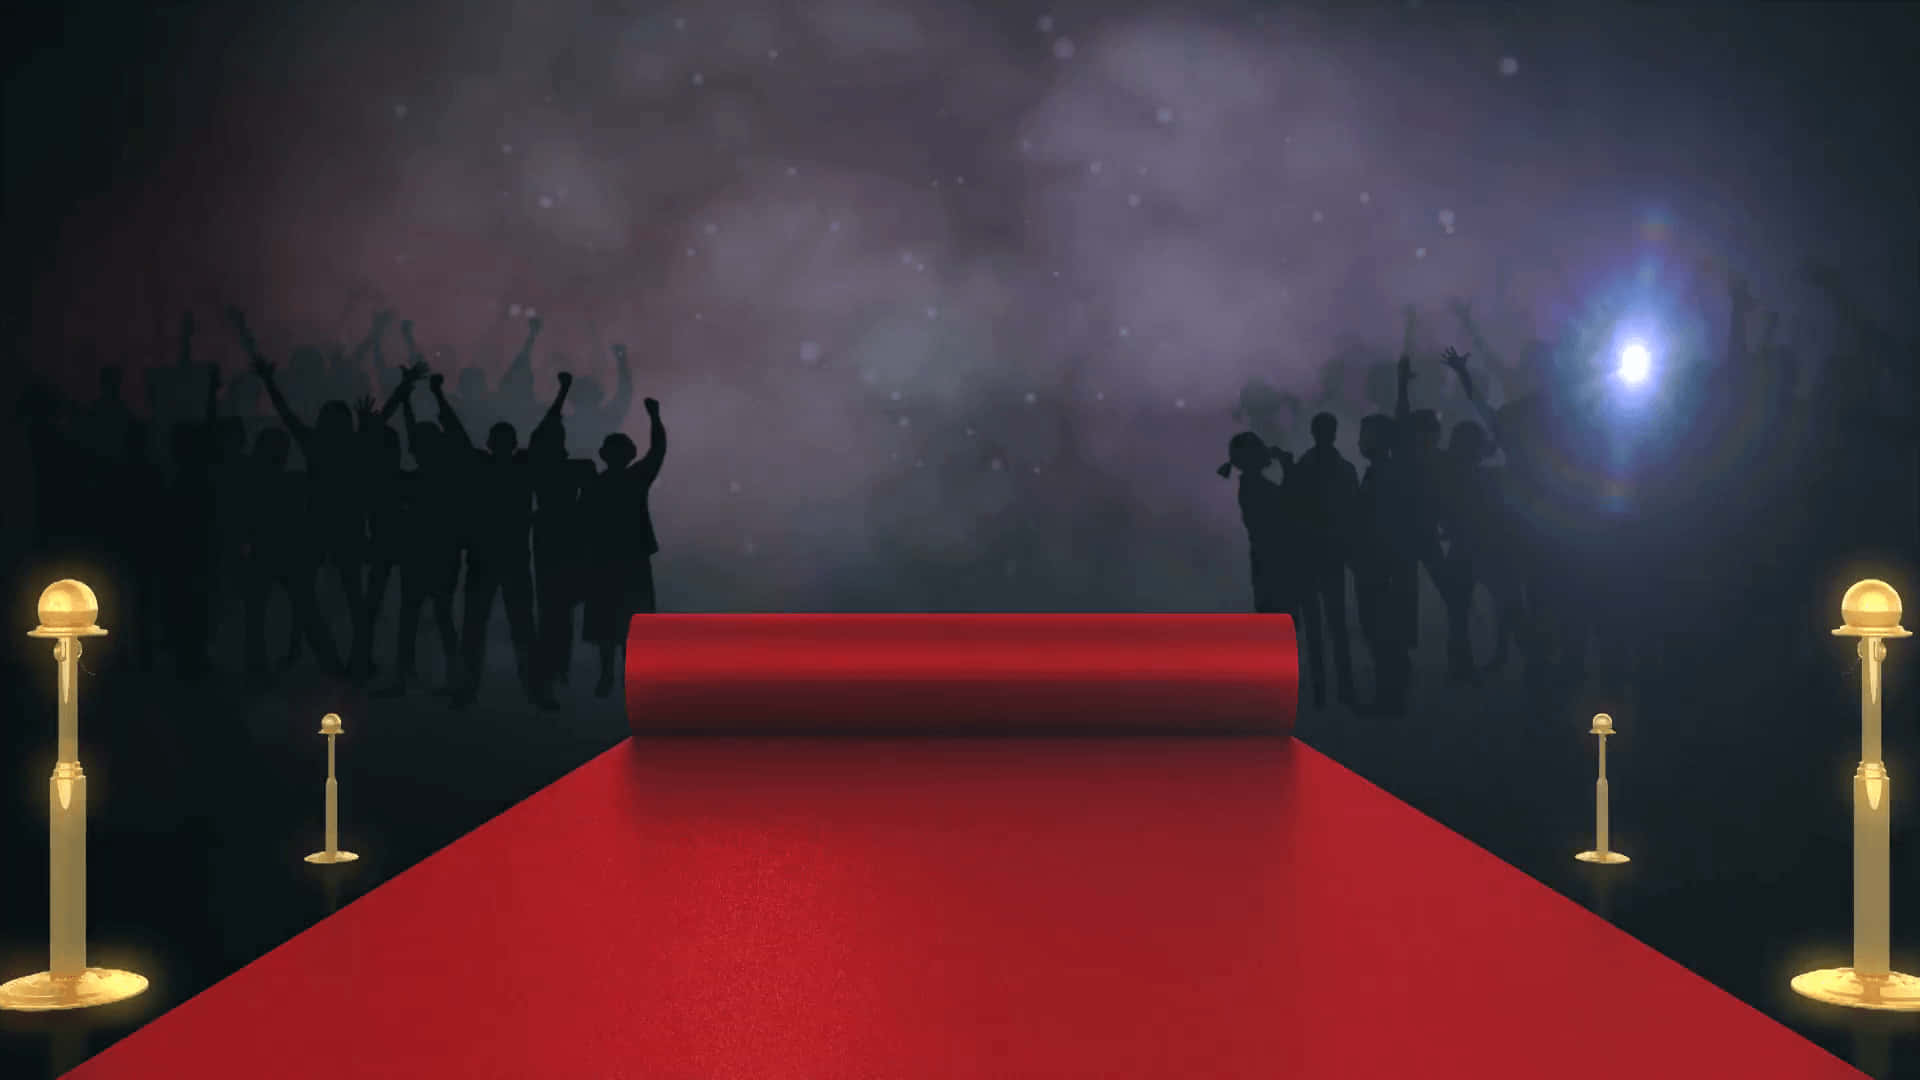 500+] Red Carpet Background s 